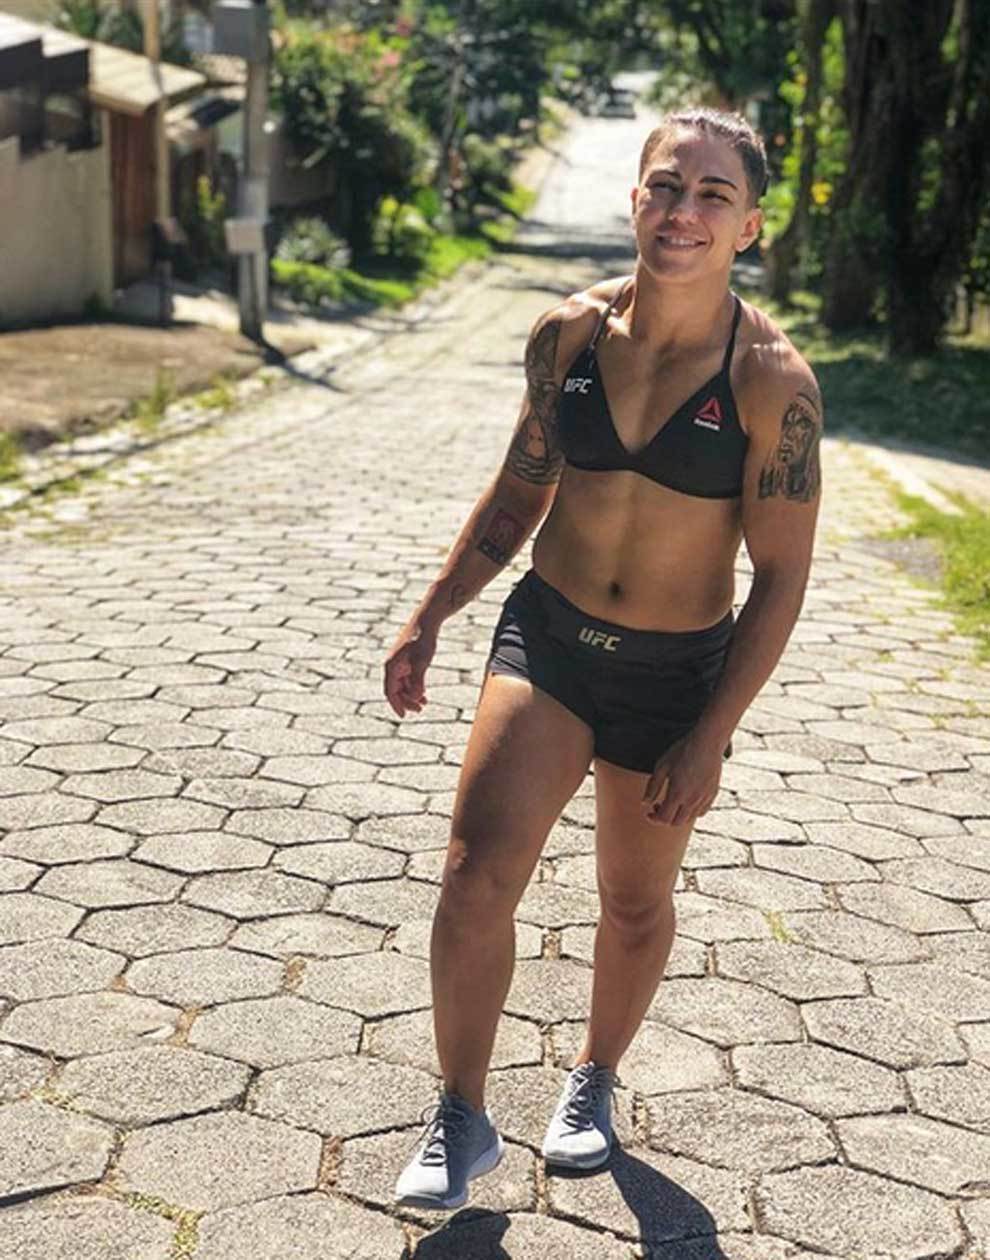 Jessica andrade - nude photos - Jessica Andrade paid off house and car with...